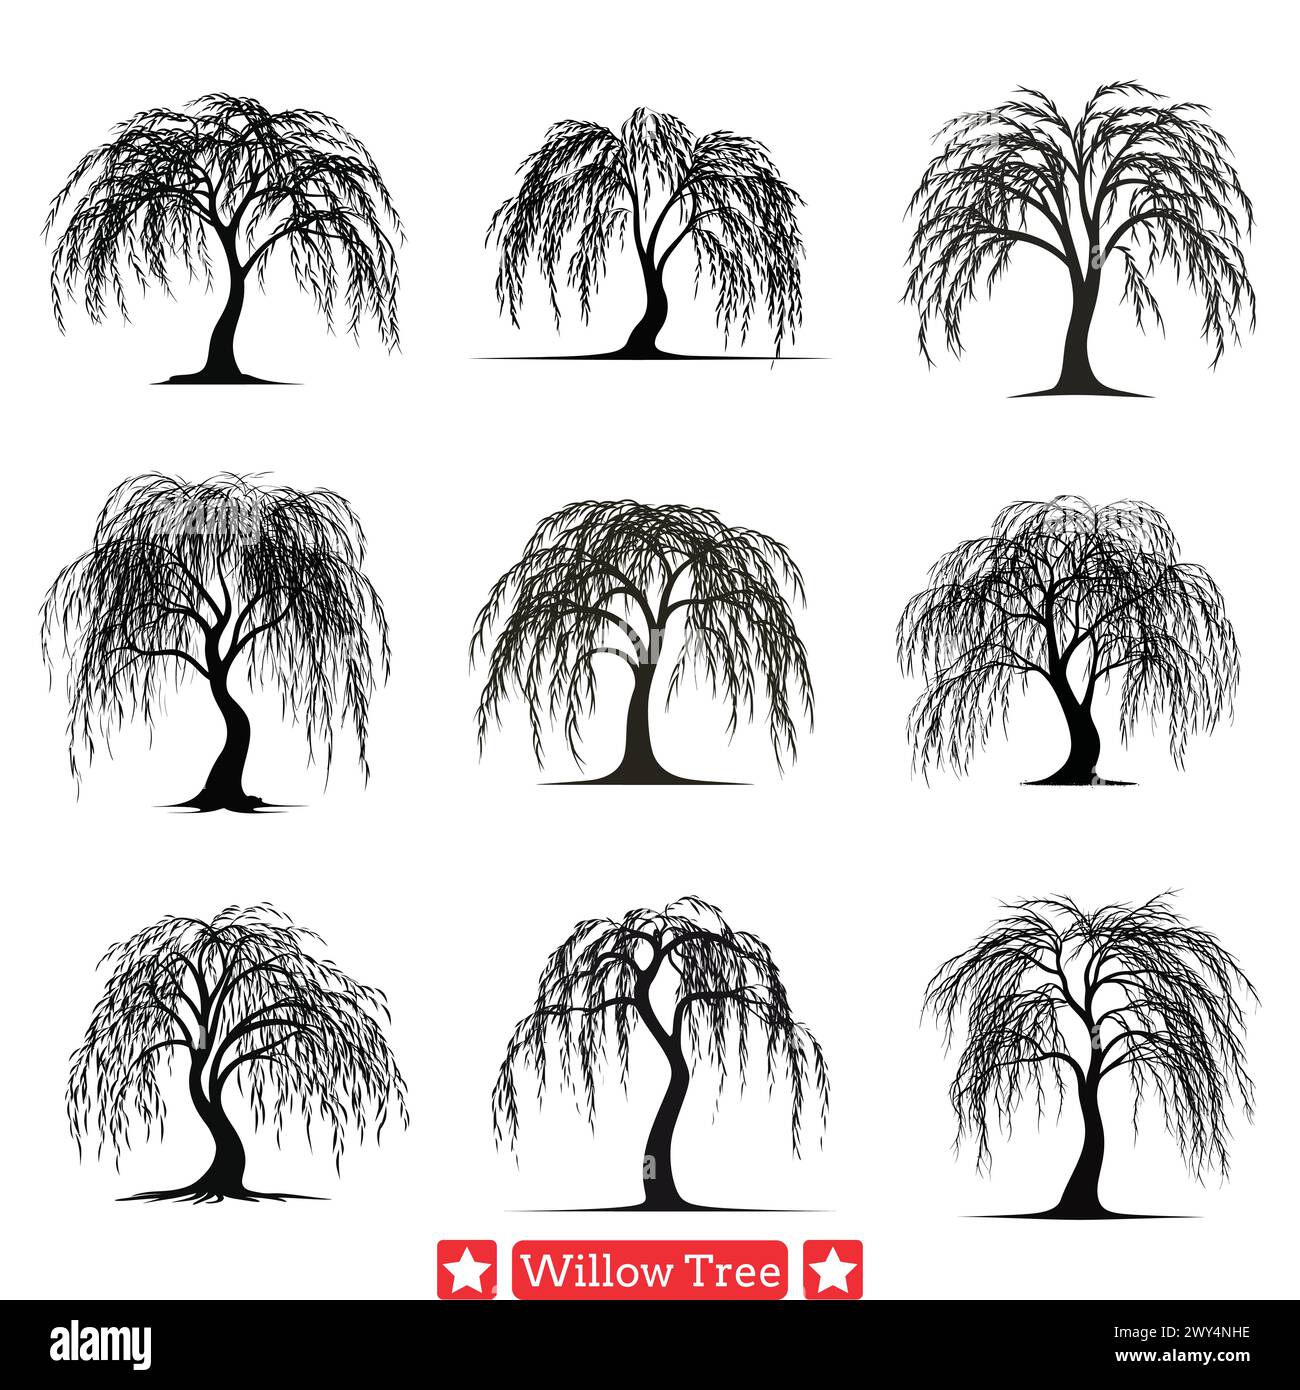 Harmony in Nature Willow Tree Vector Pack for Serenity and Balance Illustrazione Vettoriale